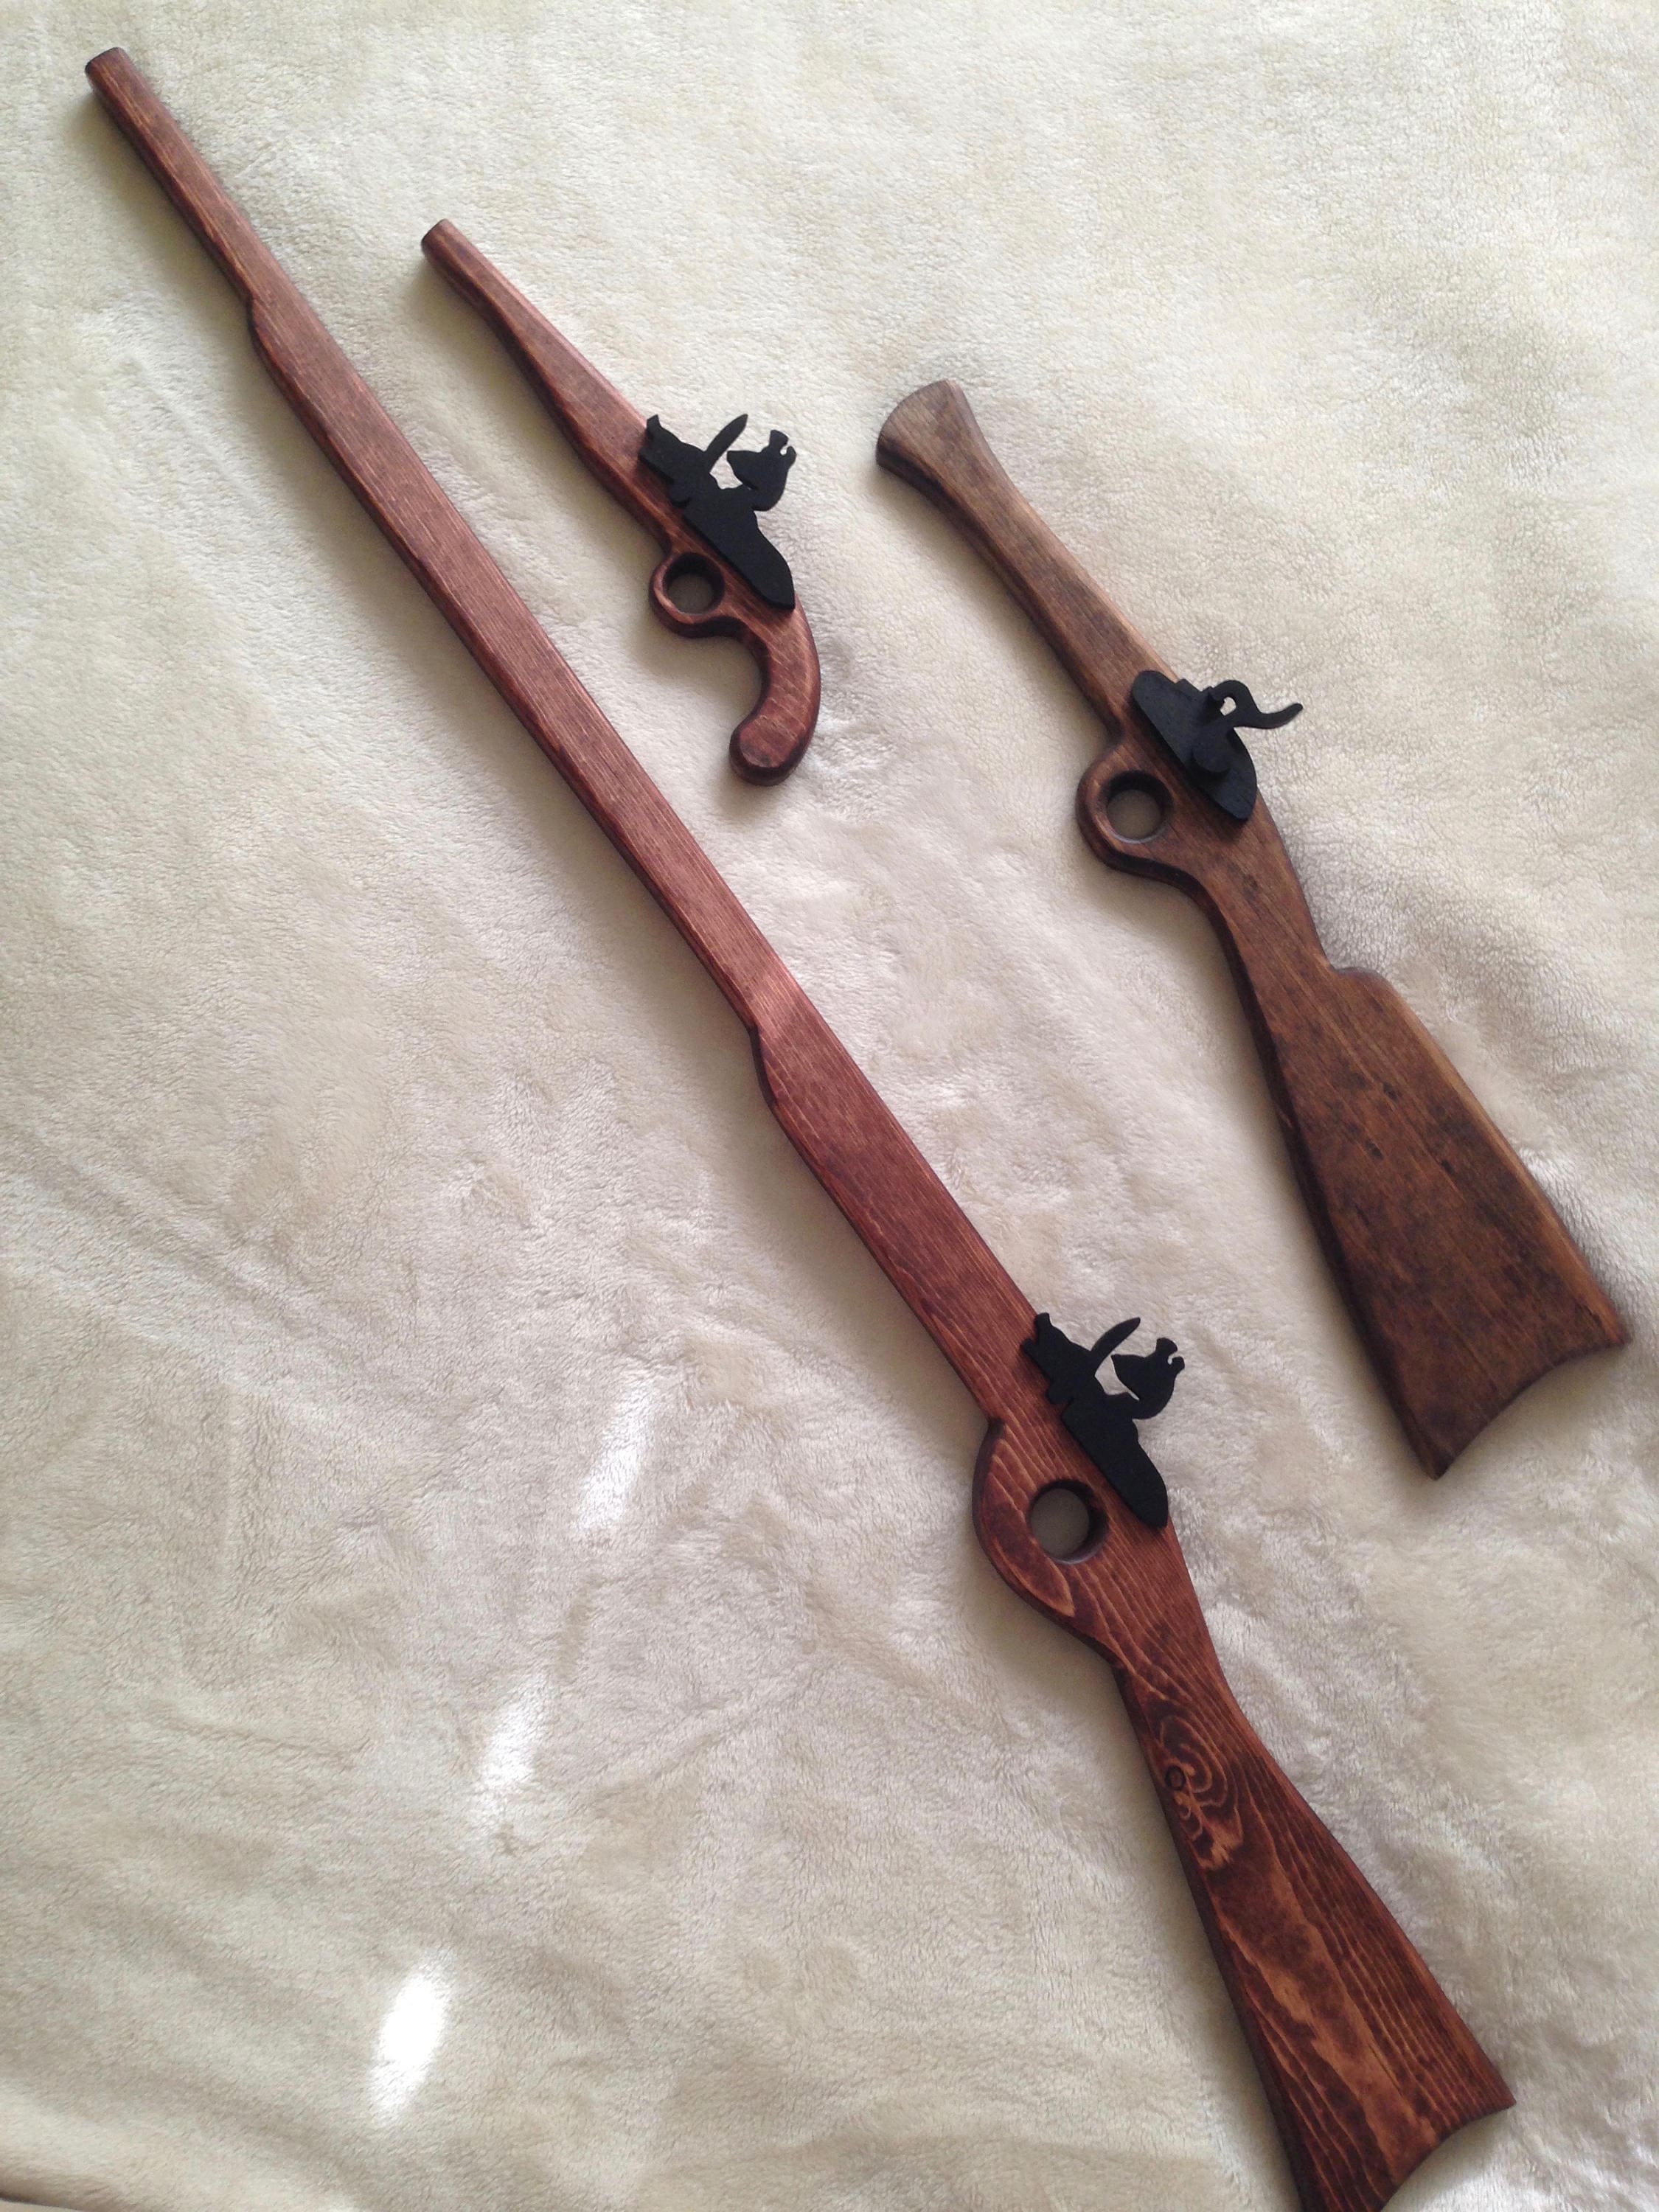 Different Handmade Wooden Toy Rifles, Guns For Children Stock Photo,  Picture and Royalty Free Image. Image 139285886.